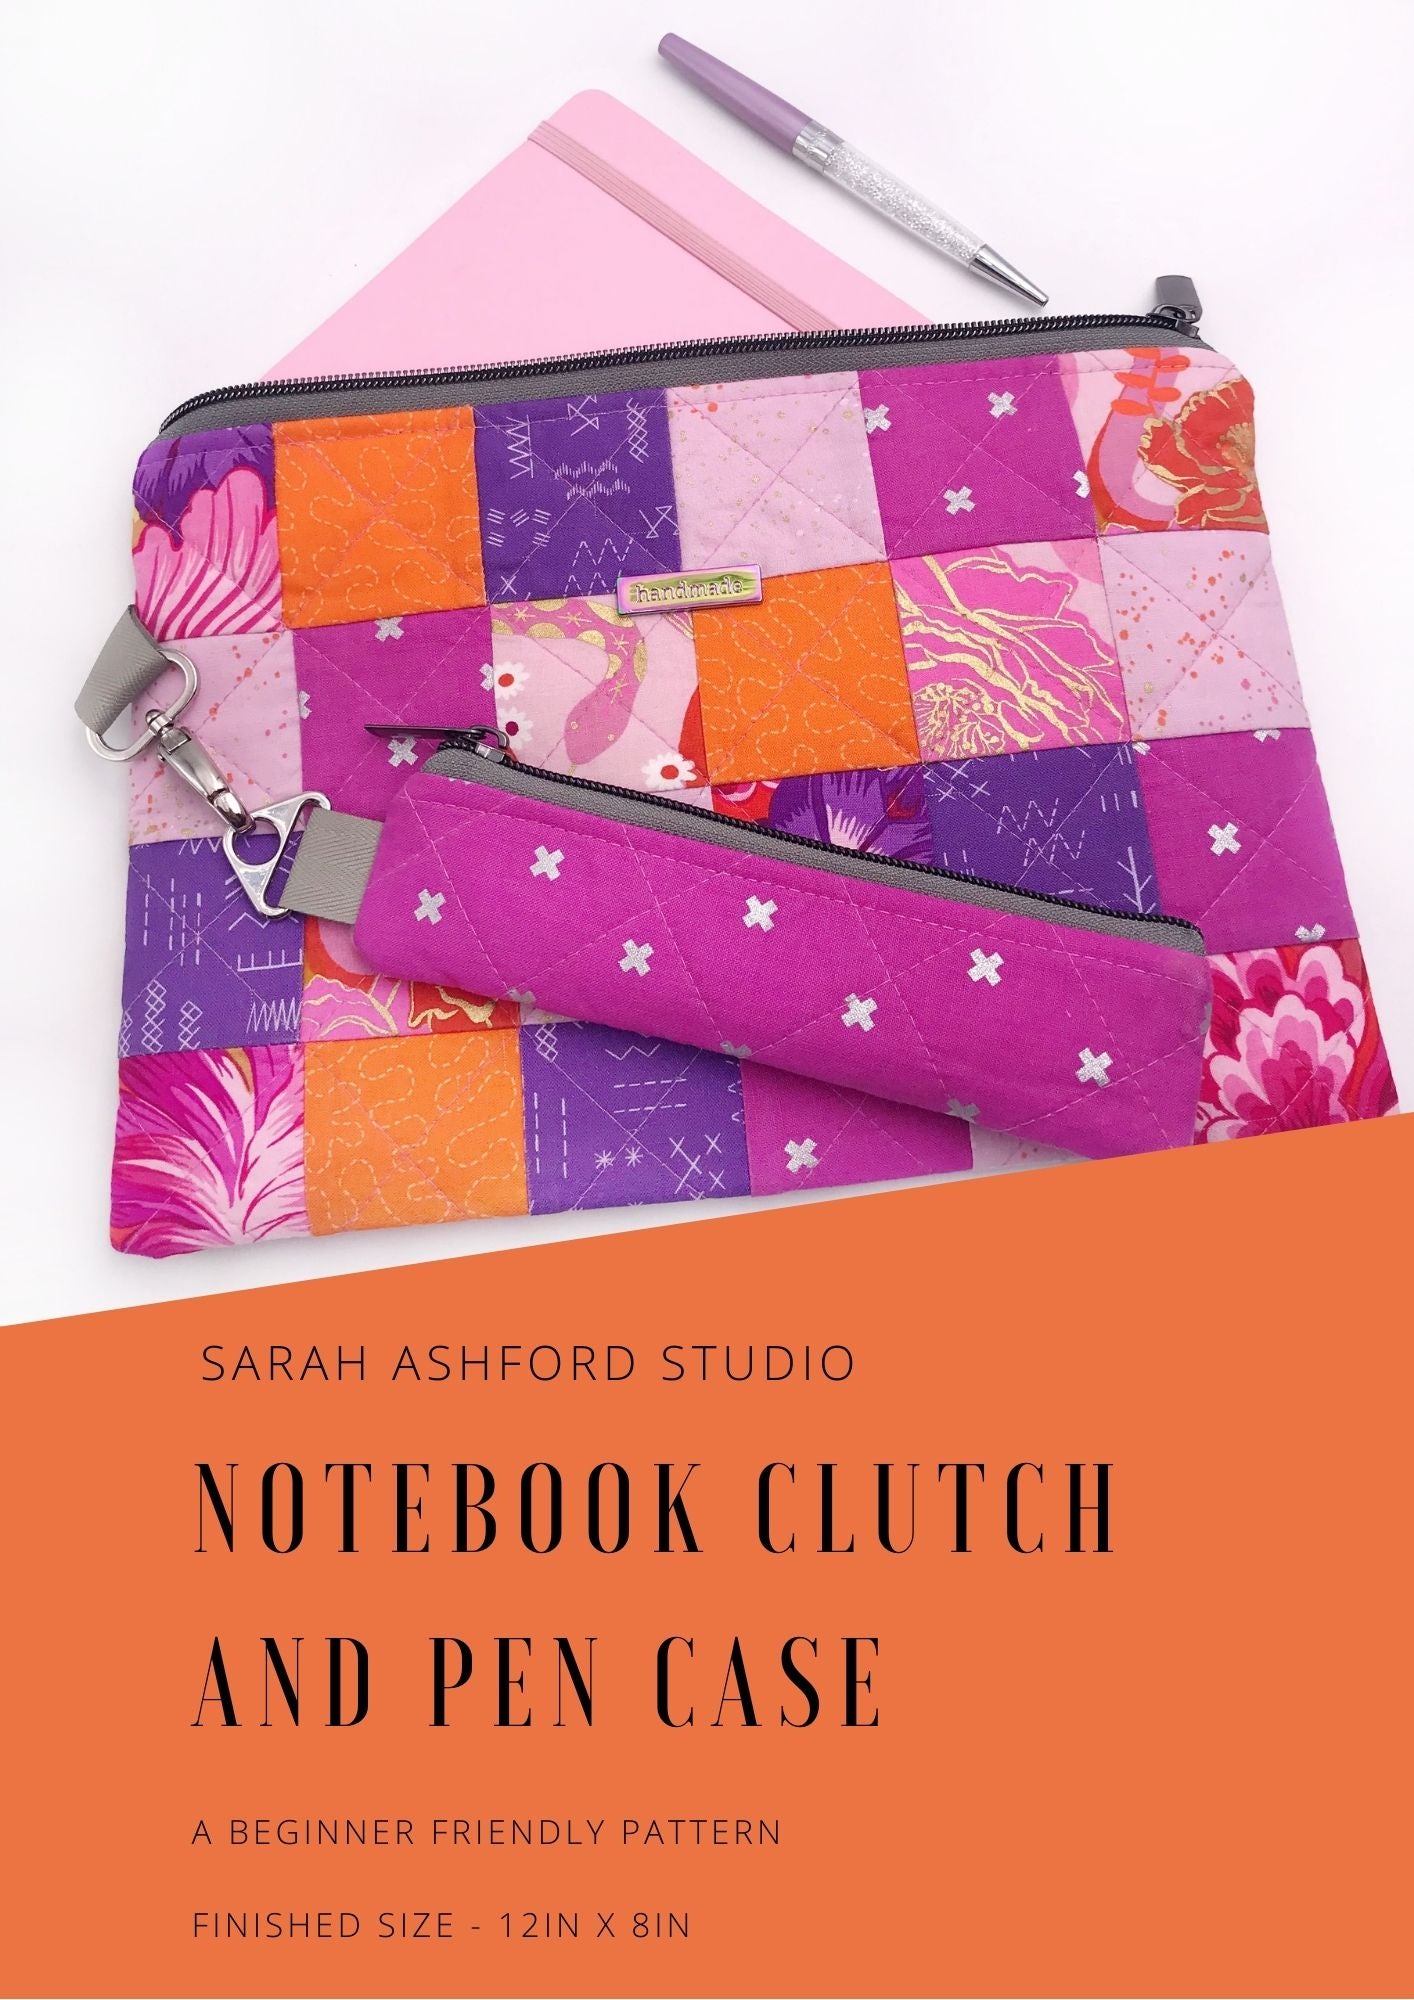 Sewing pattern. A zipiper bag made up of small purple, pink and orange squares holds a notebook and pen.  Attached by a keyring is a pencil case in pink fabric, to coordinate with the main case.  